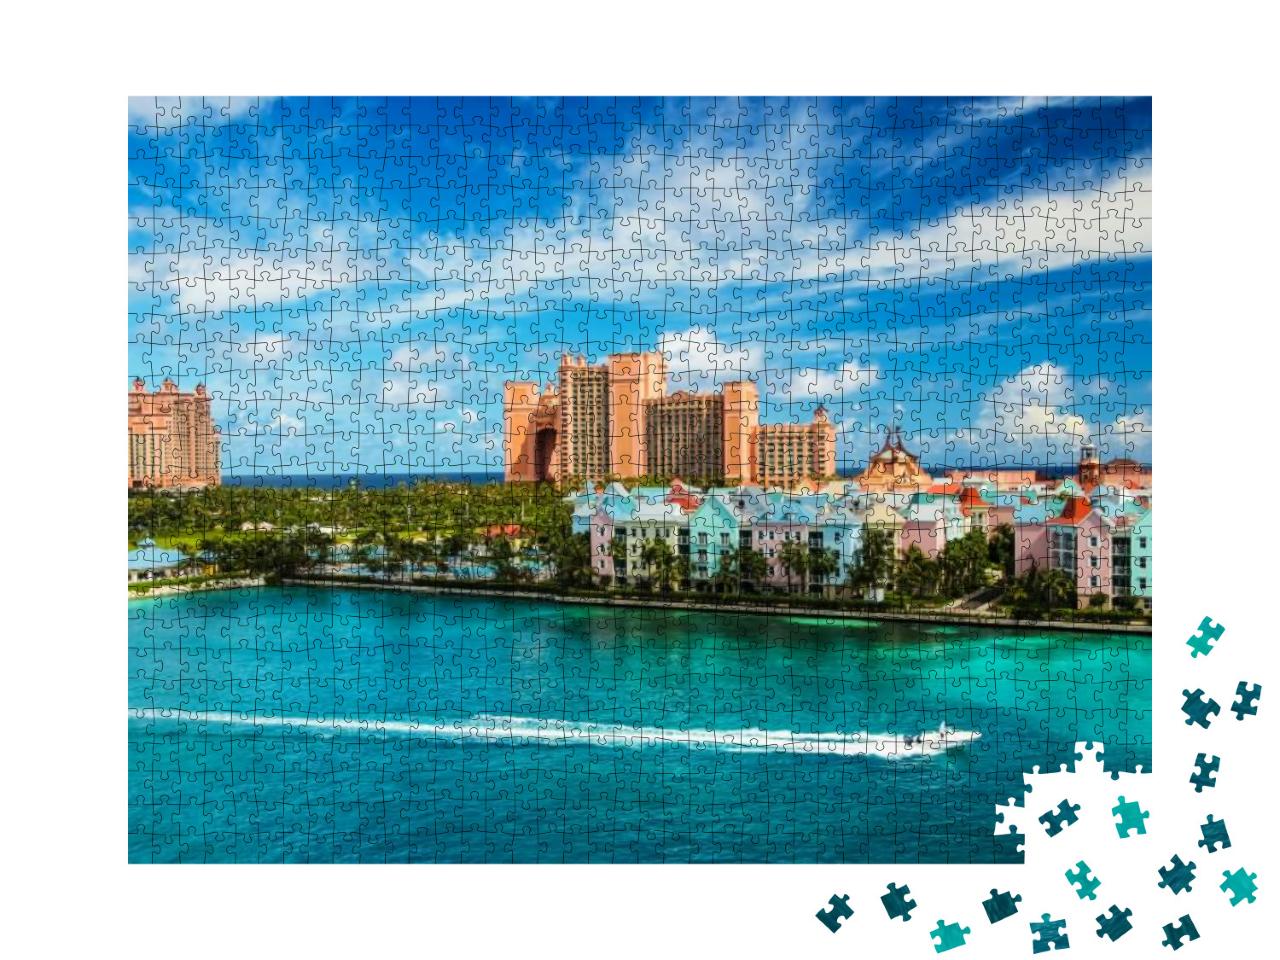 Beautiful Scene of Speed Boat, Ocean, Colorful Houses & a... Jigsaw Puzzle with 1000 pieces